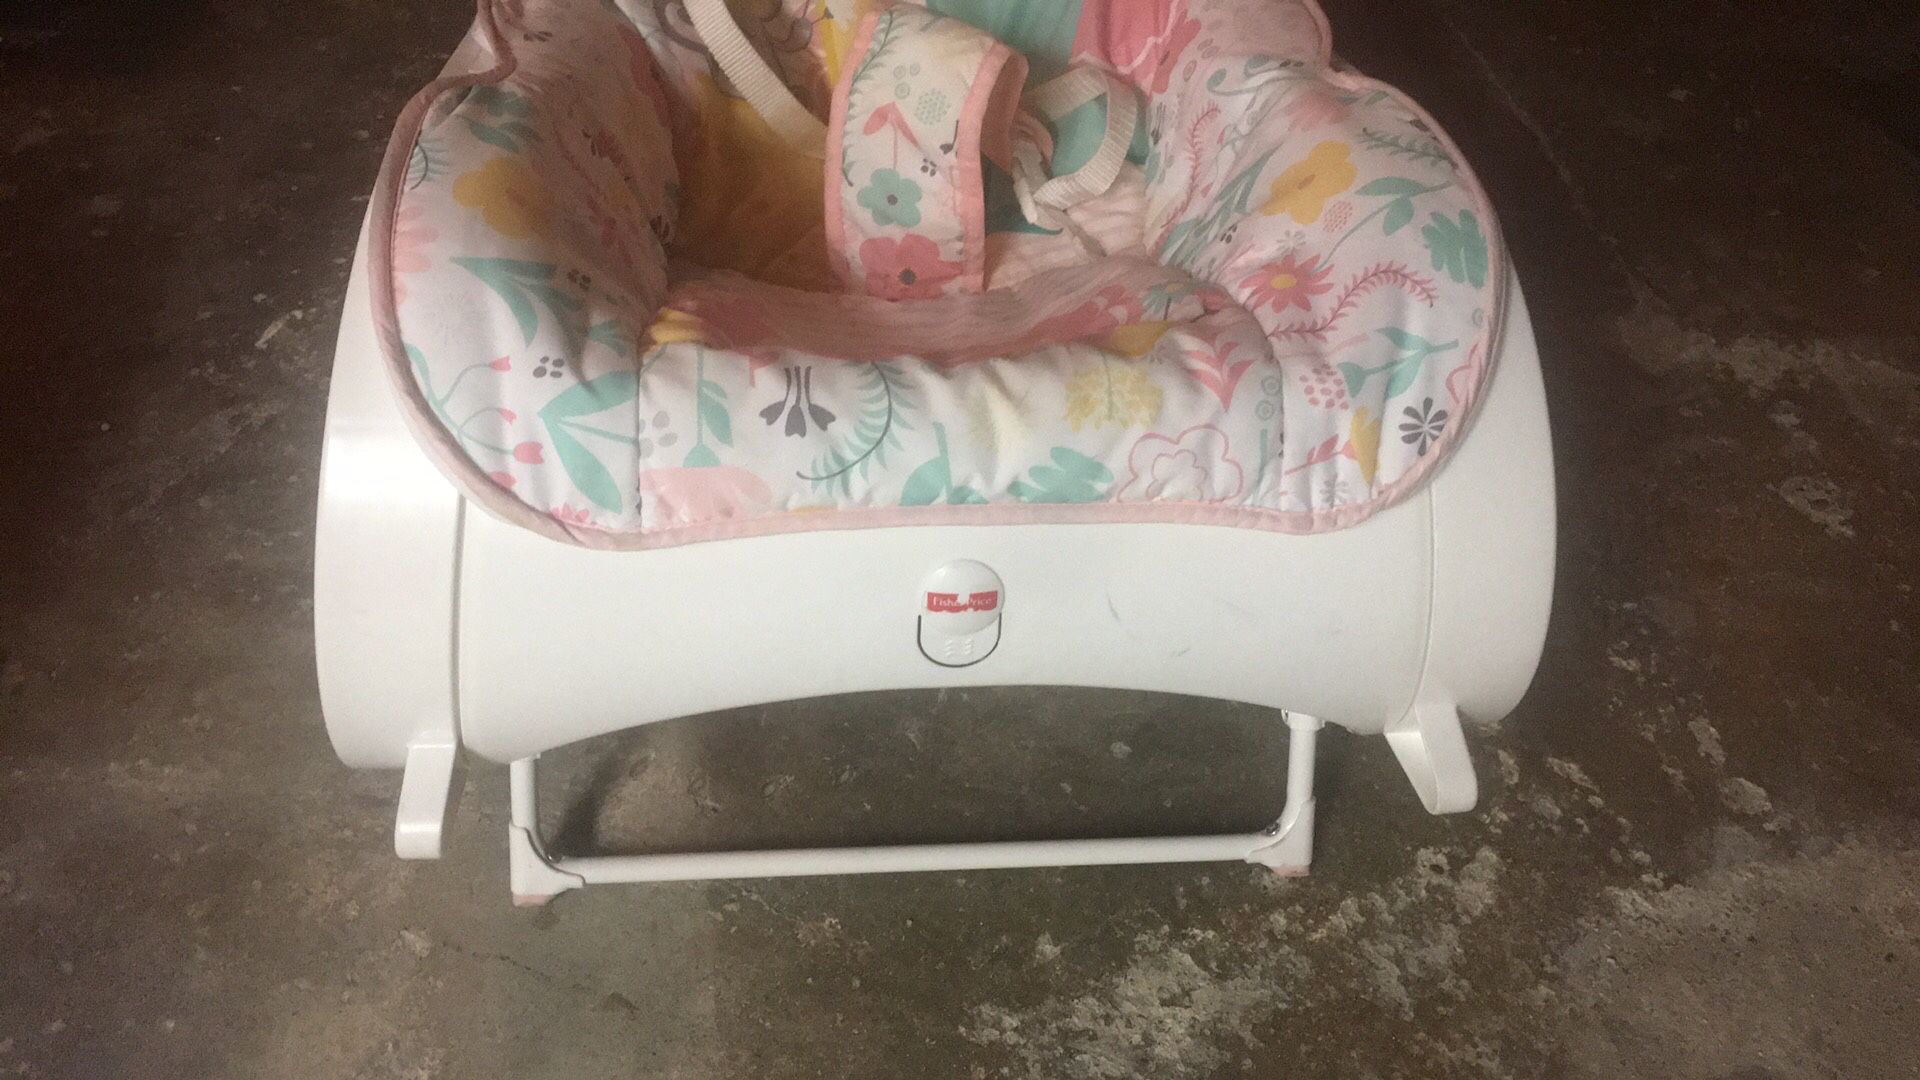 FP Grow With Me Infant to Toddler chair